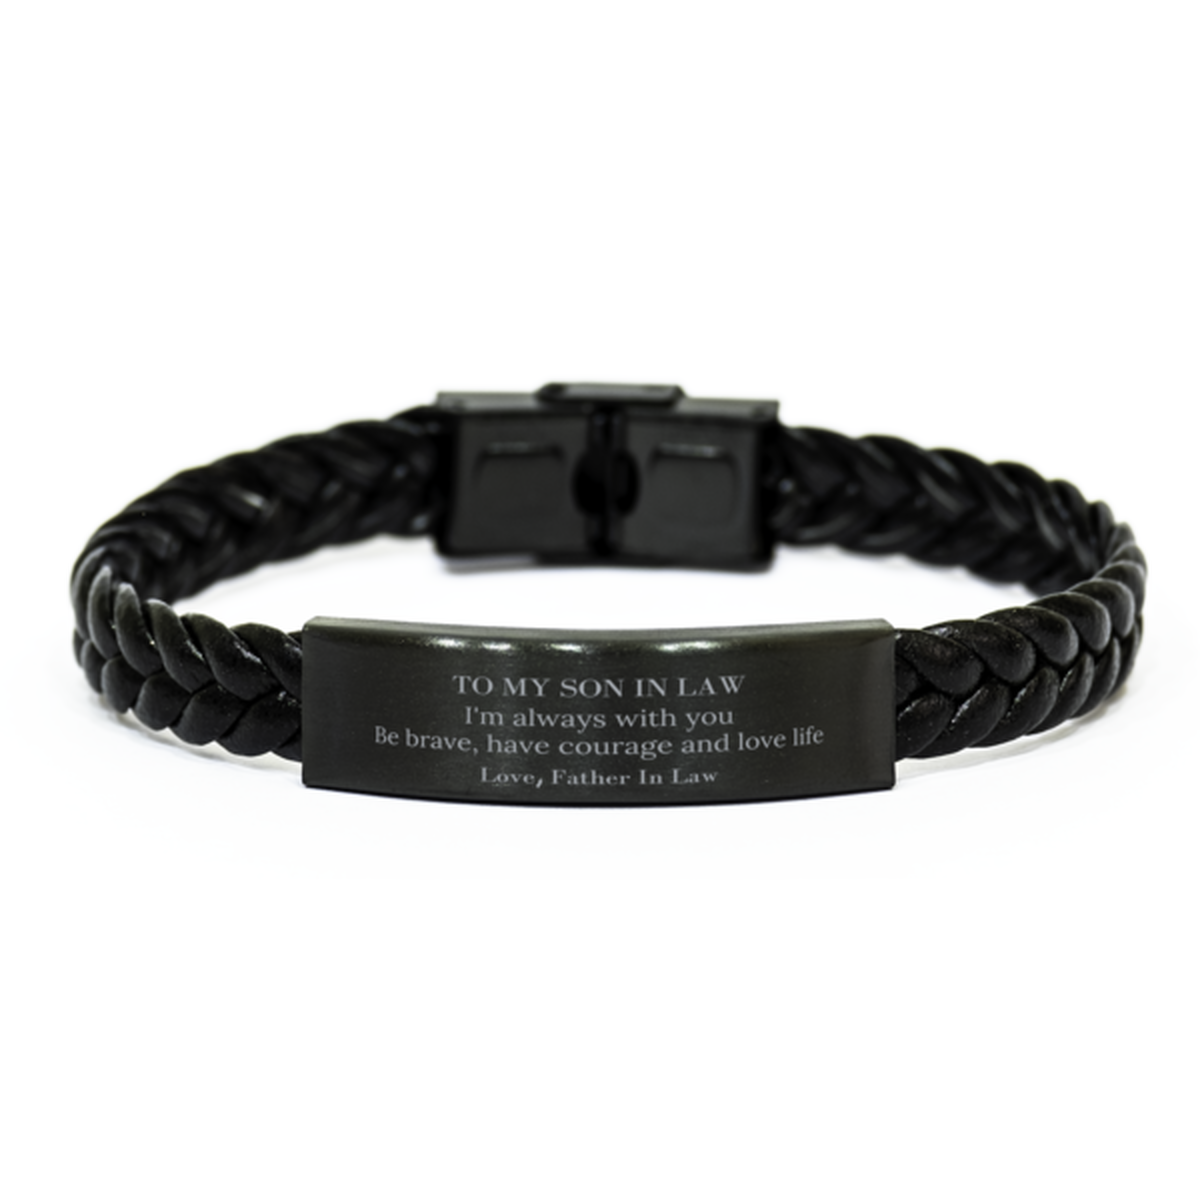 To My Son In Law Gifts from Father In Law, Unique Braided Leather Bracelet Inspirational Christmas Birthday Graduation Gifts for Son In Law I'm always with you. Be brave, have courage and love life. Love, Father In Law